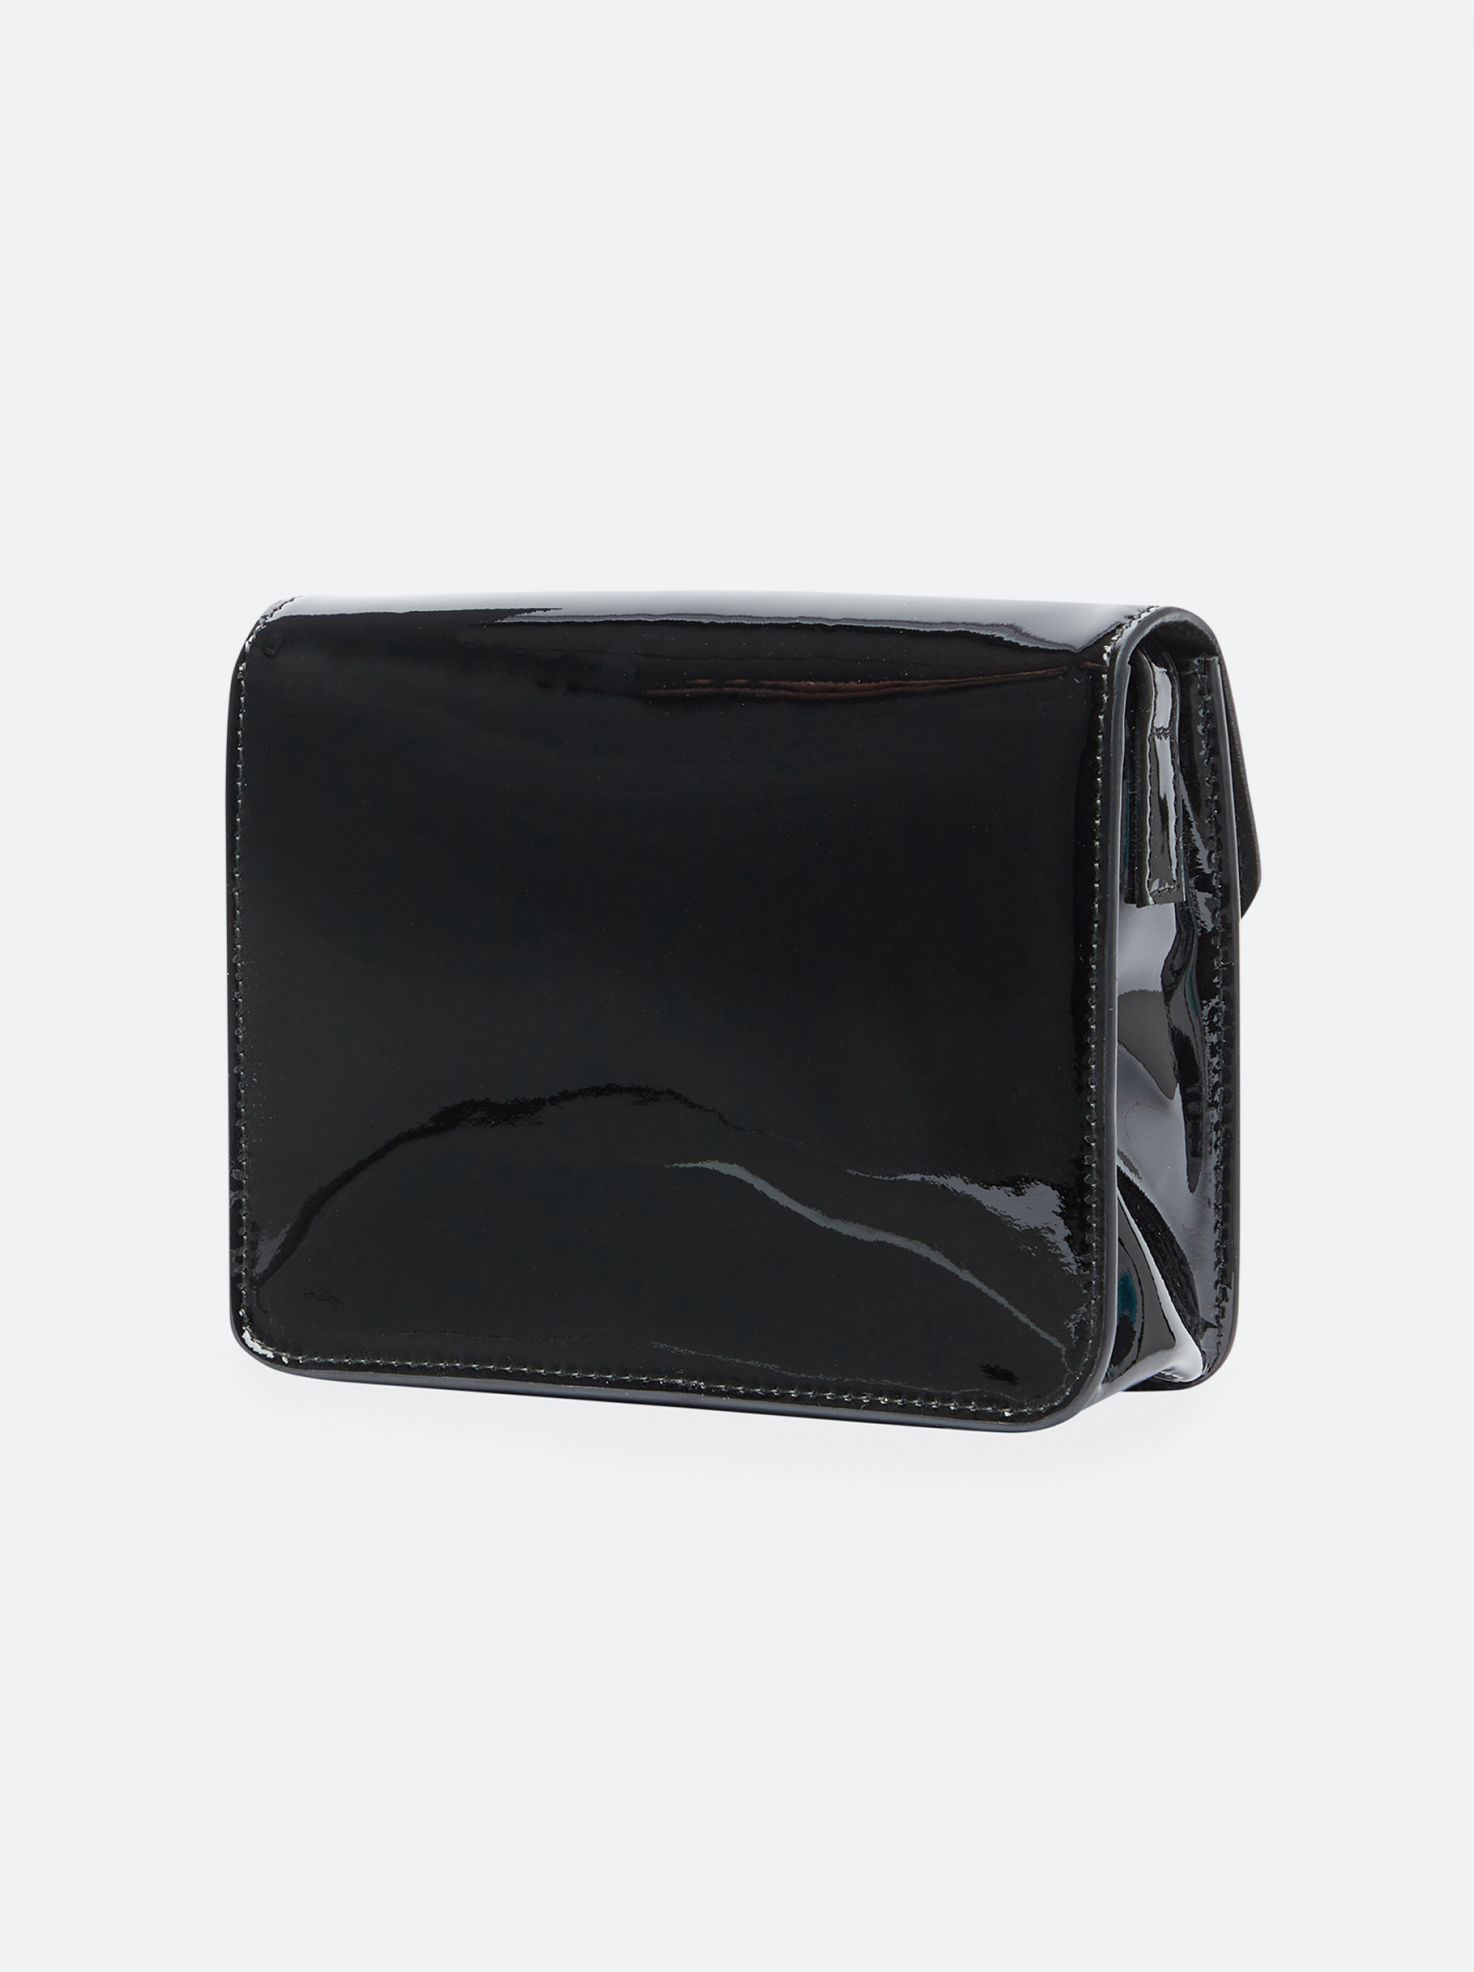 Chain Pouch With Strap In Black Croc-Effect Leather – Victoria Beckham US